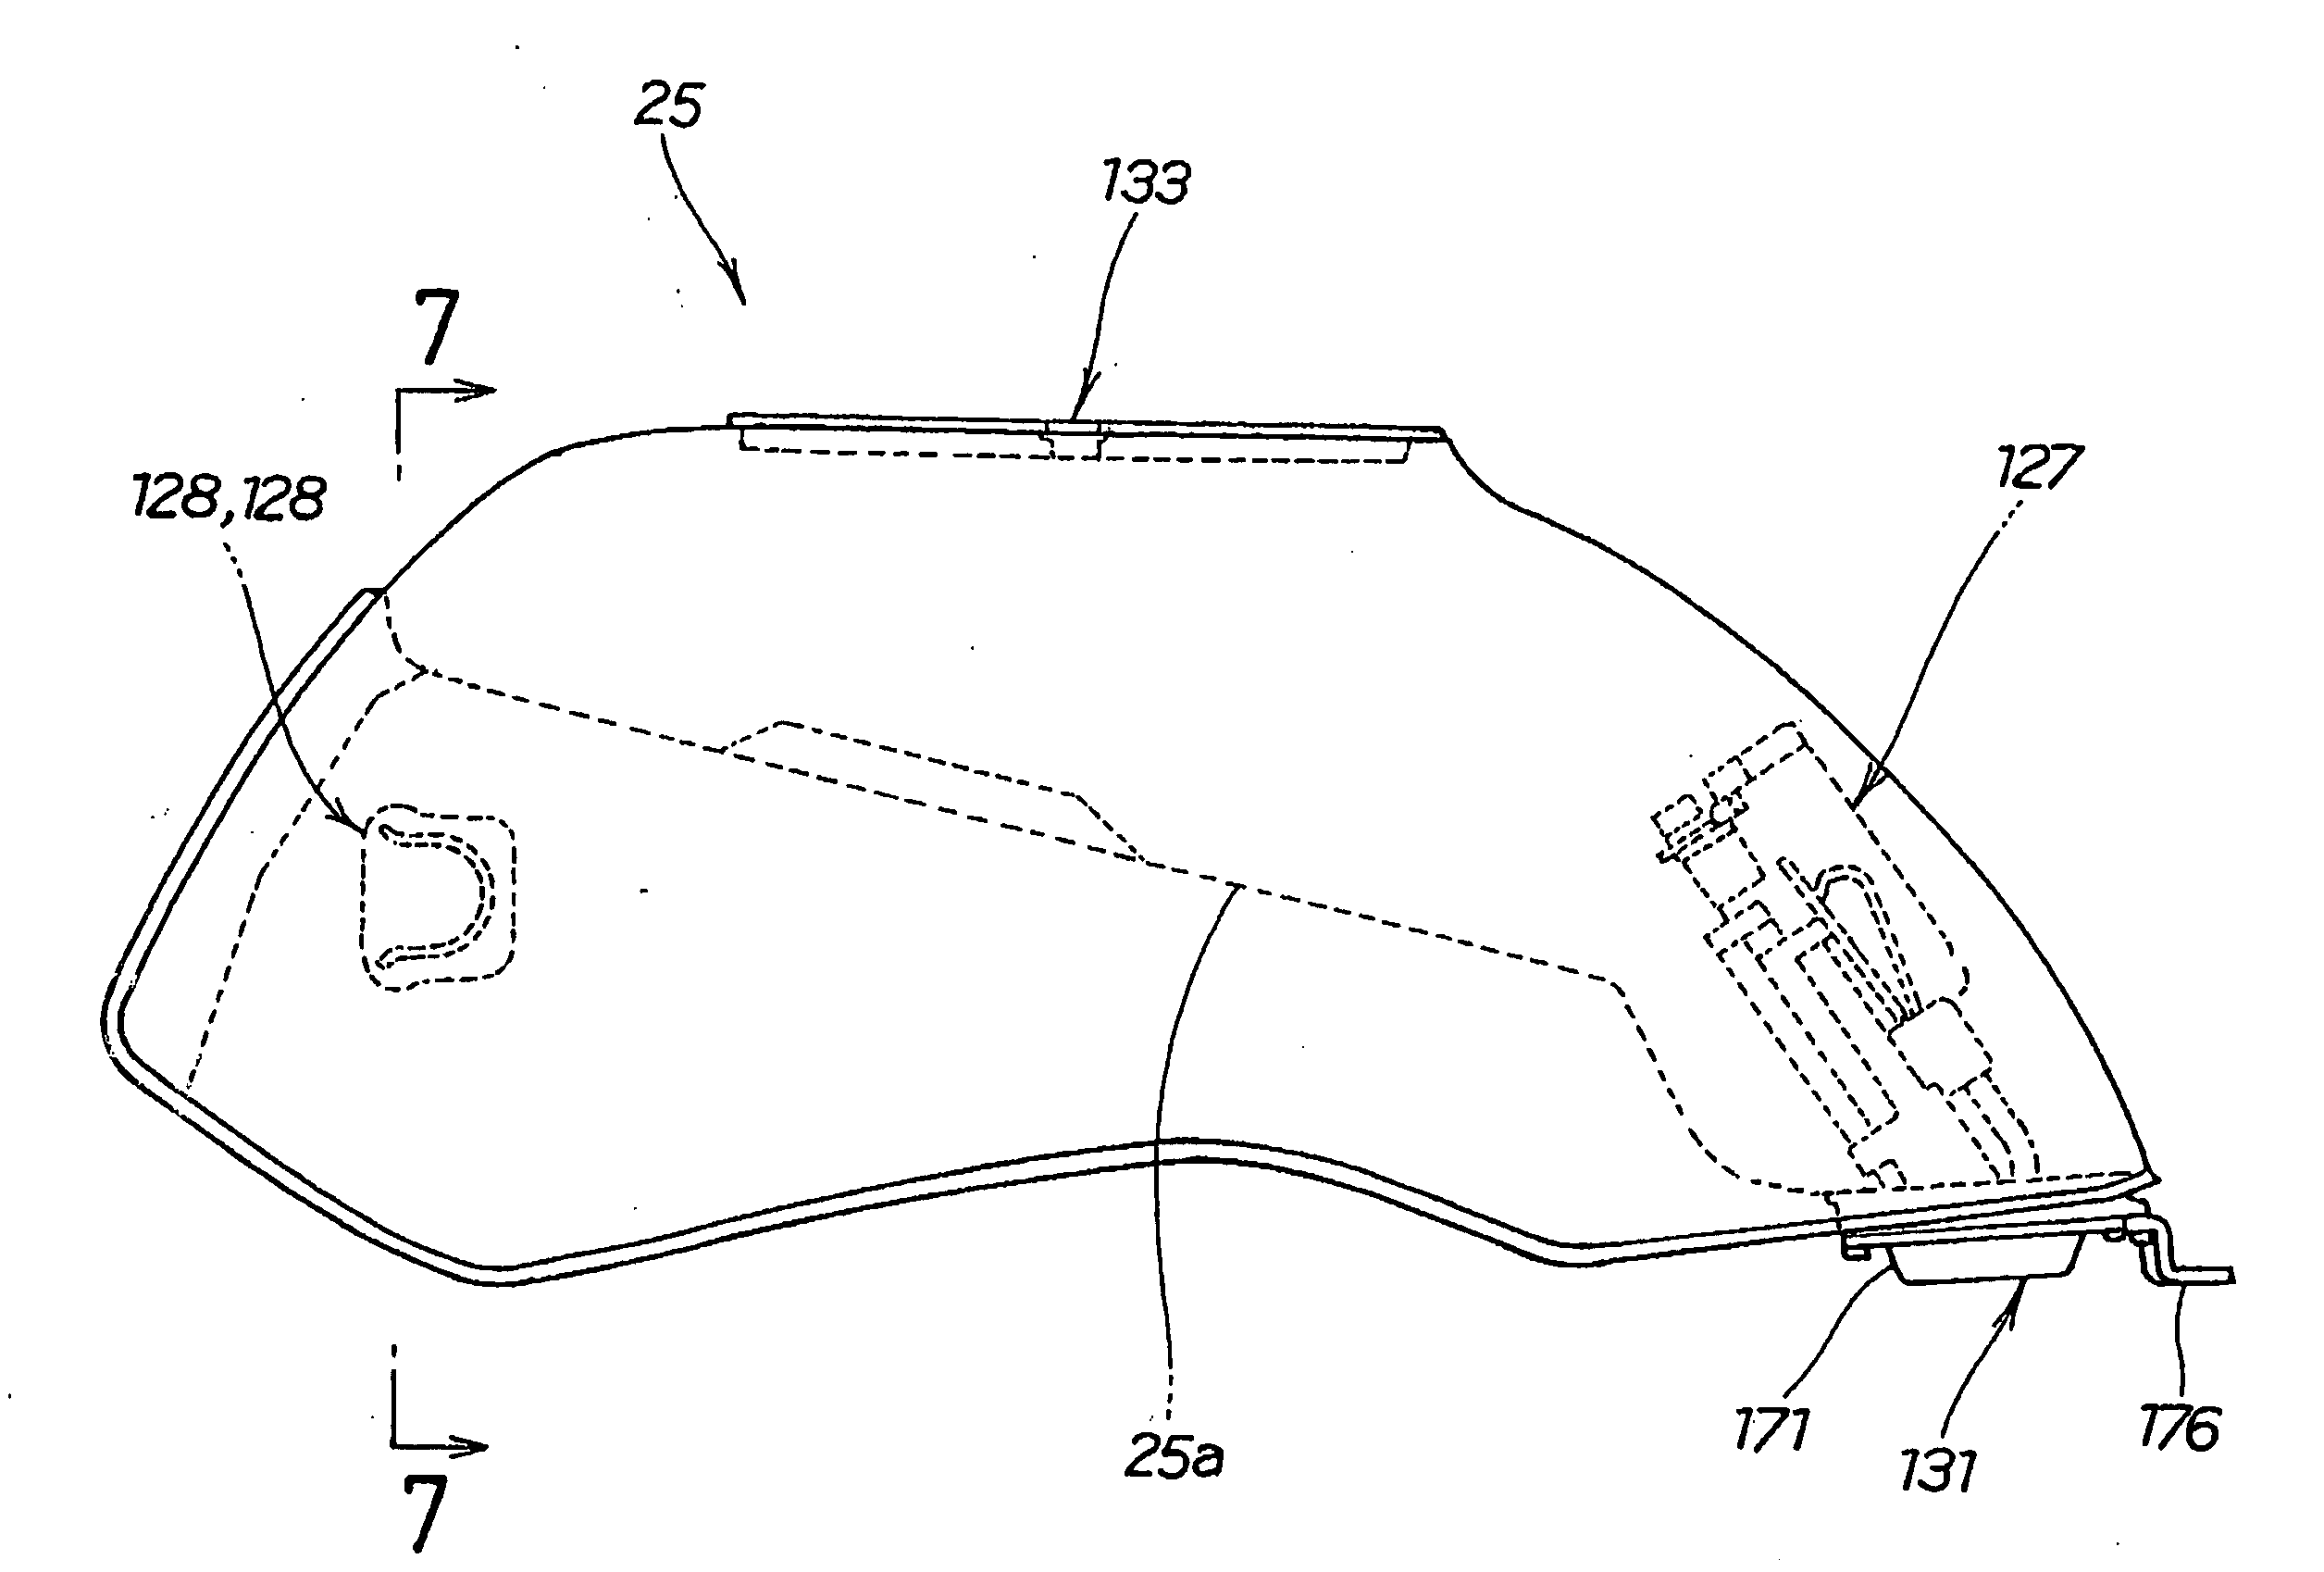 Structure of fuel pump installation area for two-wheeled vehicle